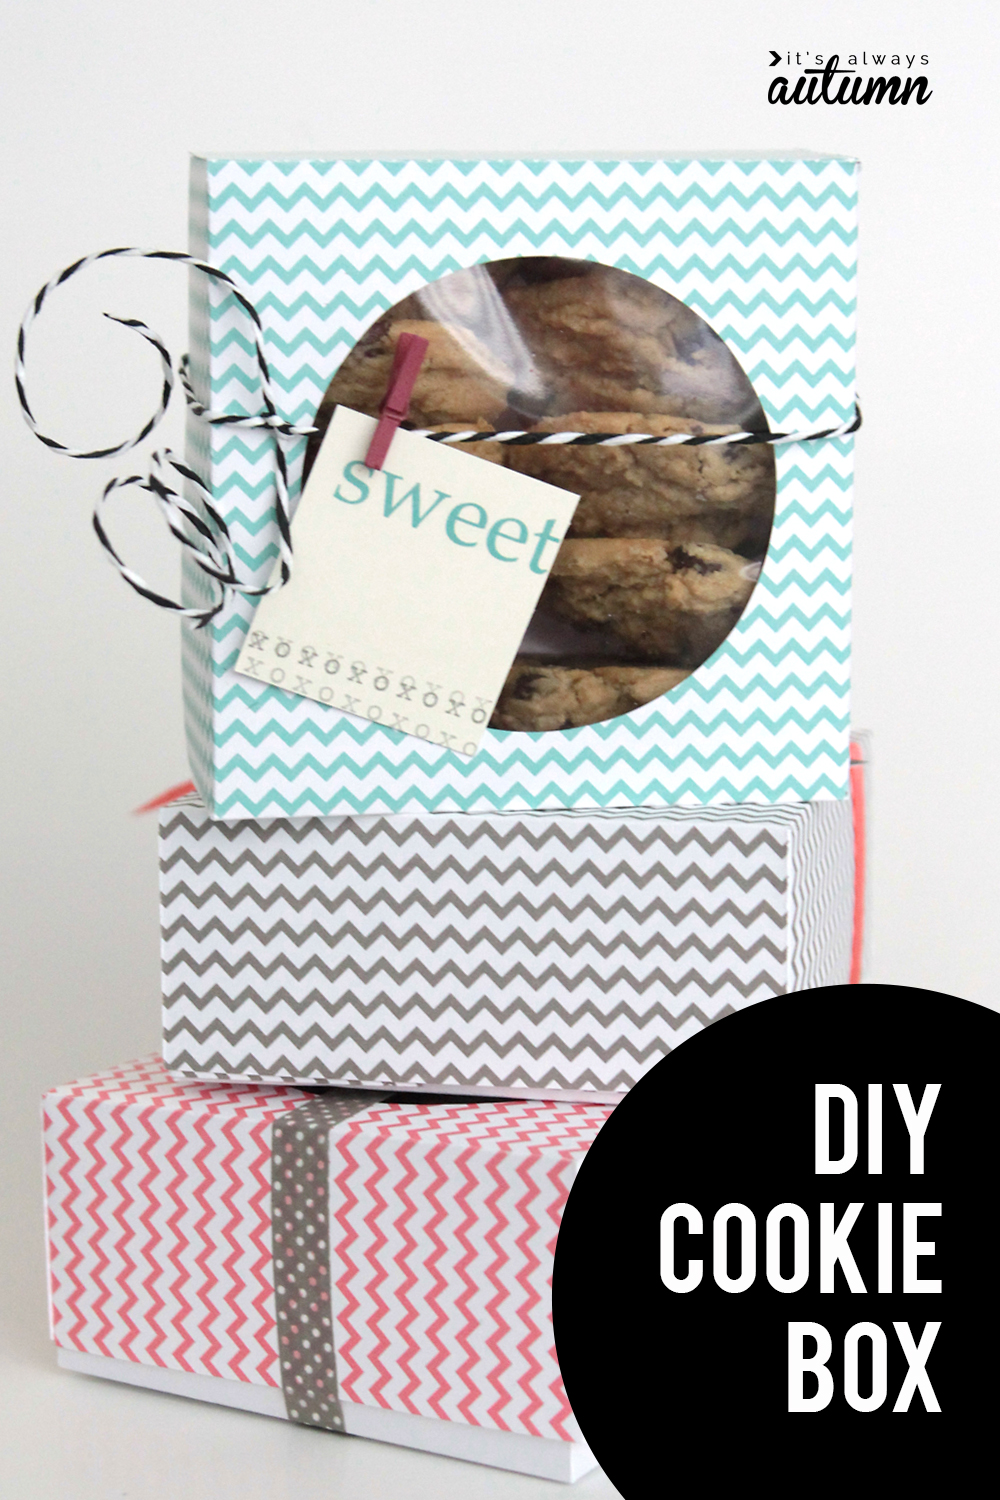 DIY cookie box. How to make a cute box for cookies from a sheet of scrapbook paper.